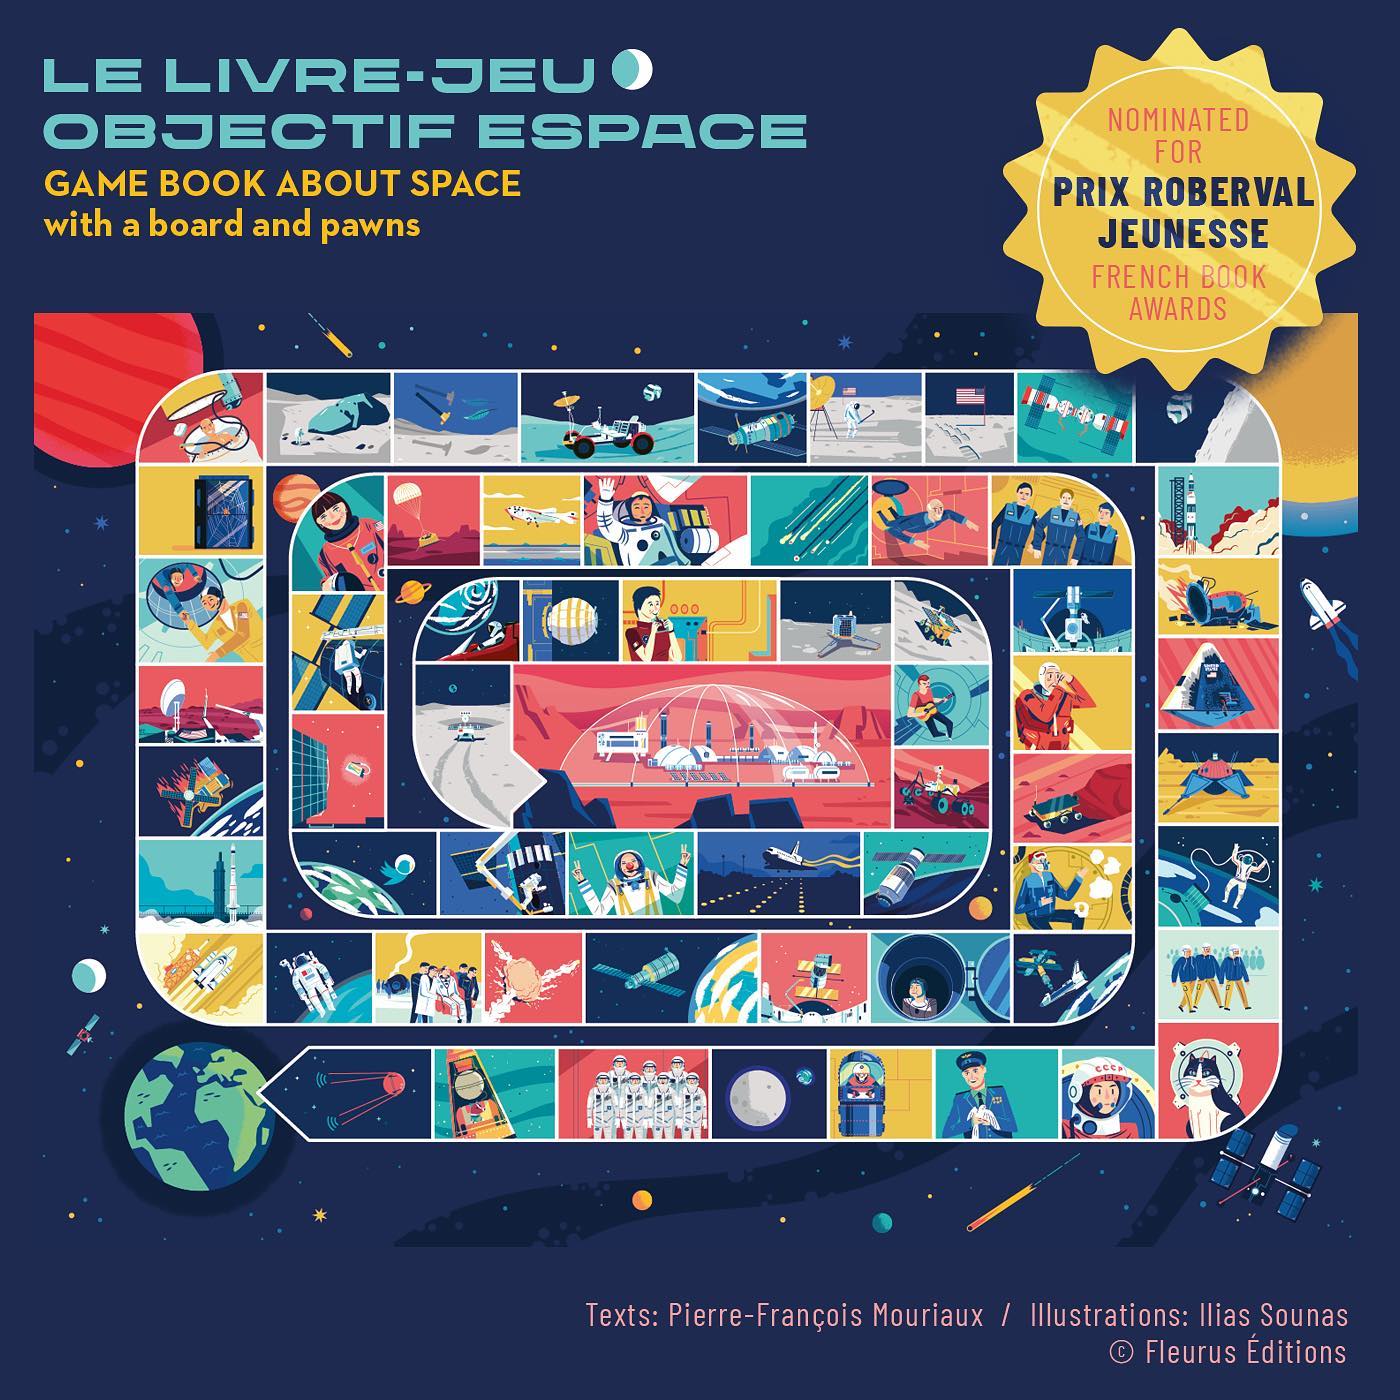 :::Le Livre-Jeu objectif espace:::A nice french game book I illustrated about space for @fleuruseditions french editions, game texts by Pierre-Francois Mouriaux.This great book features an illustrated game board(all vector design) for children and teens to learn the human space expedition history. There are 64 game squares along with cardboard pawns and a lot of pages explaining each square story.I am very proud of this book game as it was nominated for “Prix Roberval Jeunesse” 2020, a famous french book award!!!.....#illustration #gamebook #bookdesign #boardgames #boardgamedesign #boardgameart #illustrator #adobeillustrator #vectorart #sounasart #εικονογράφηση #επιτραπέζιο #space #διάστημα #fleuruseditions #moon #sun #shuttle #spaceship #illustration_best #illustrationoftheday #vectordesign #gameart